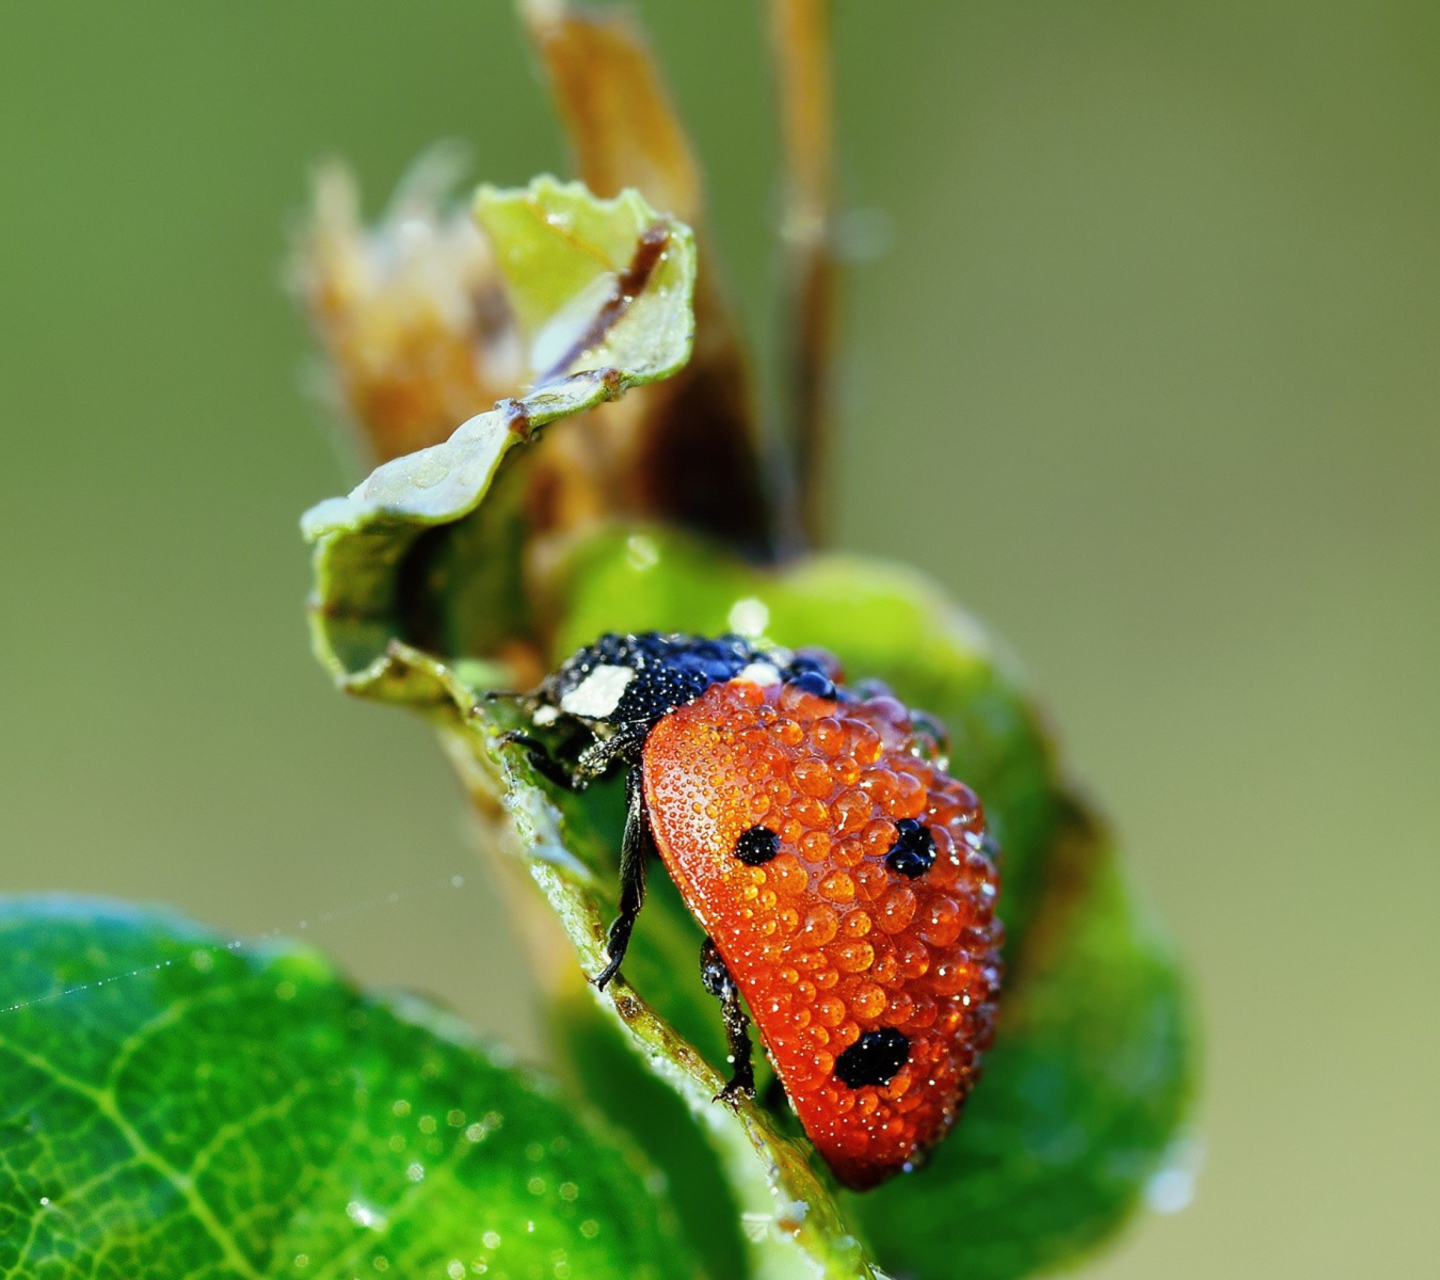 Das Ladybug Covered With Dew Drops Wallpaper 1440x1280